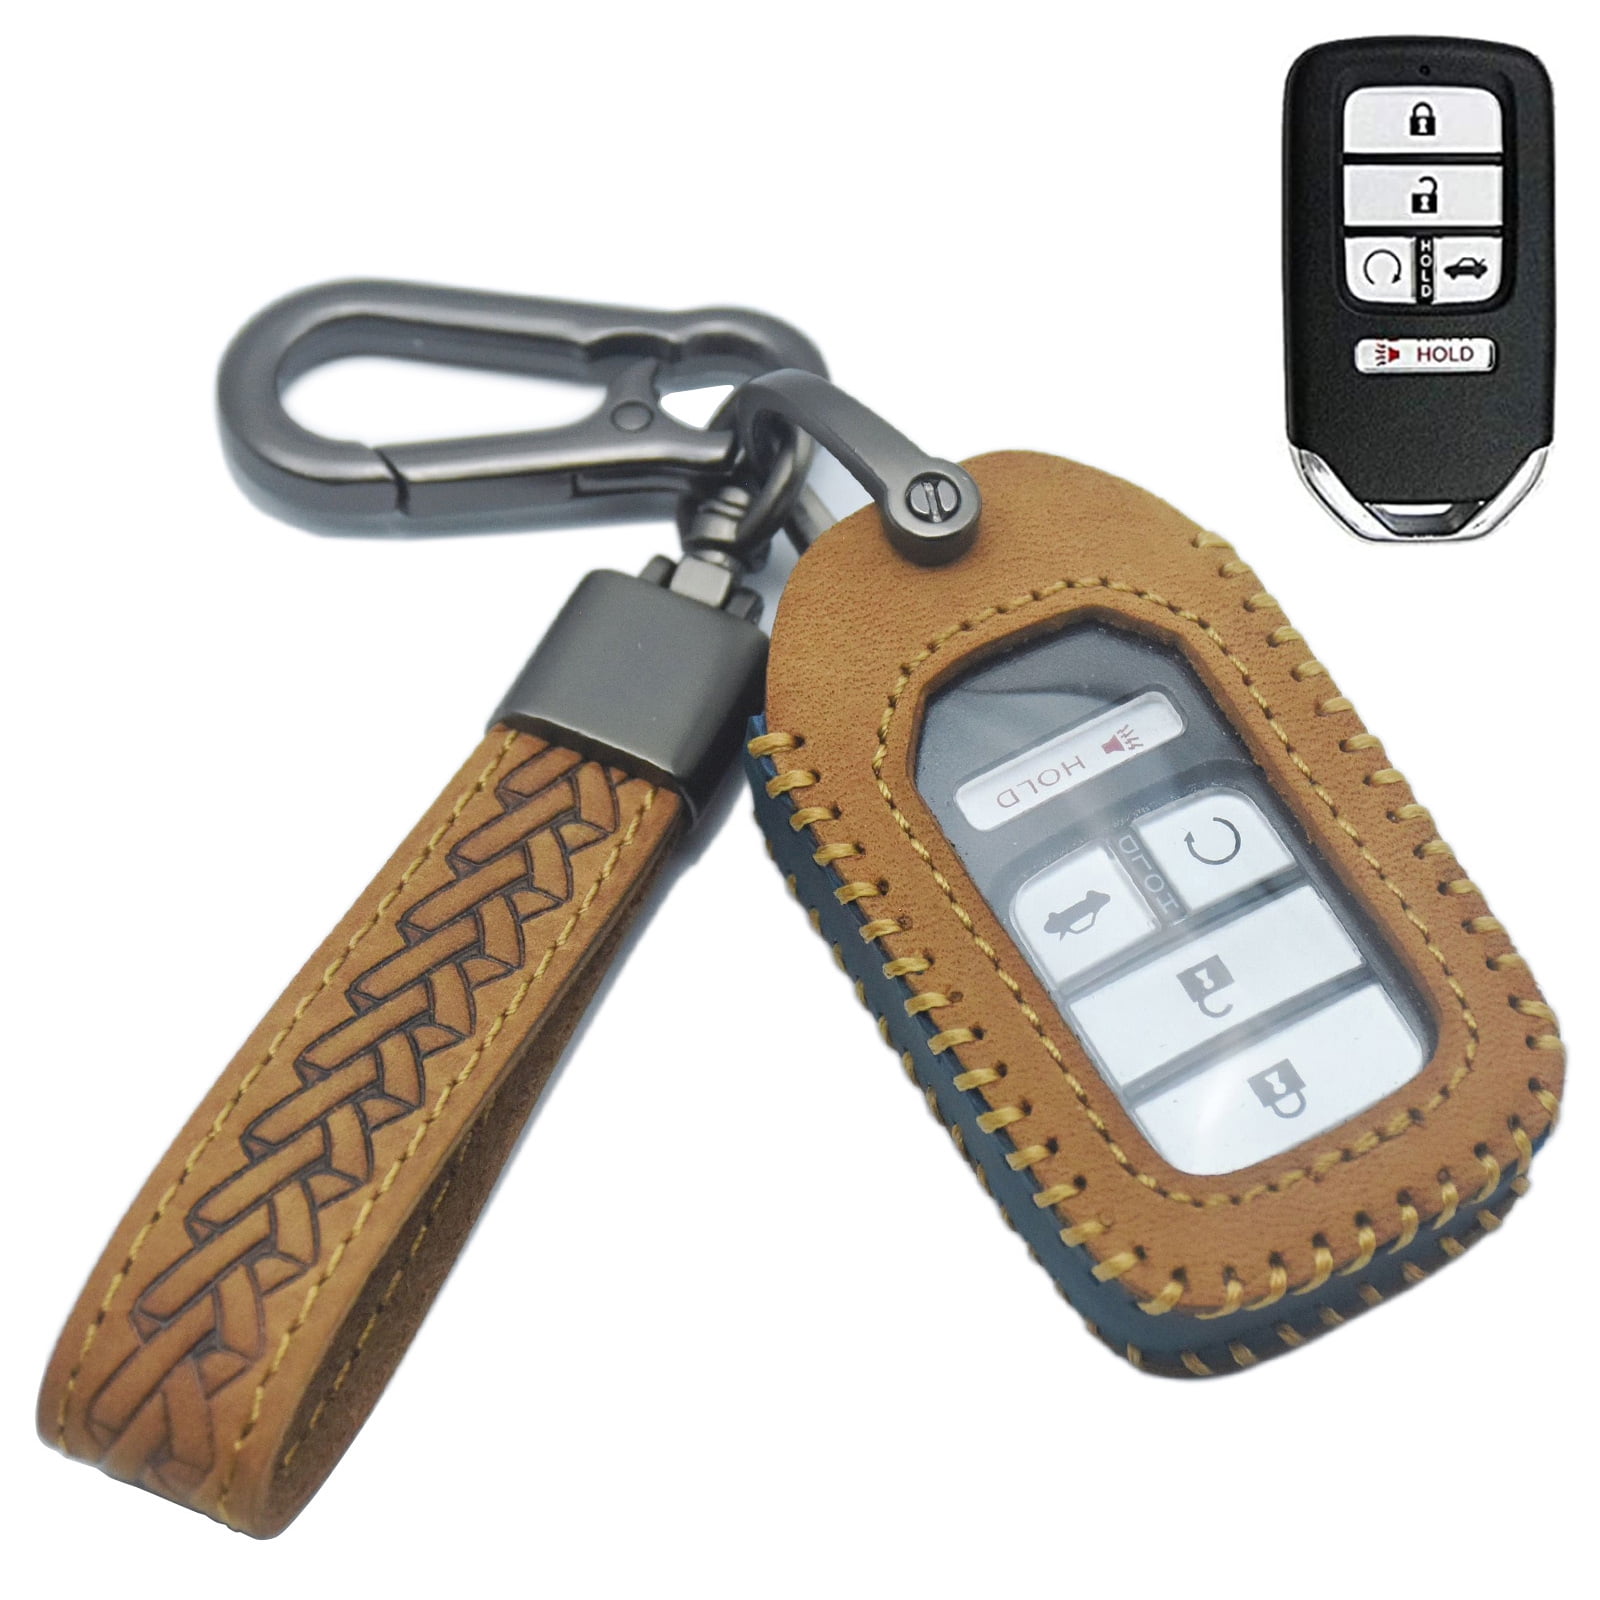 YUBOMT for Honda Key Fob Cover,Genuine Leather Key Case with